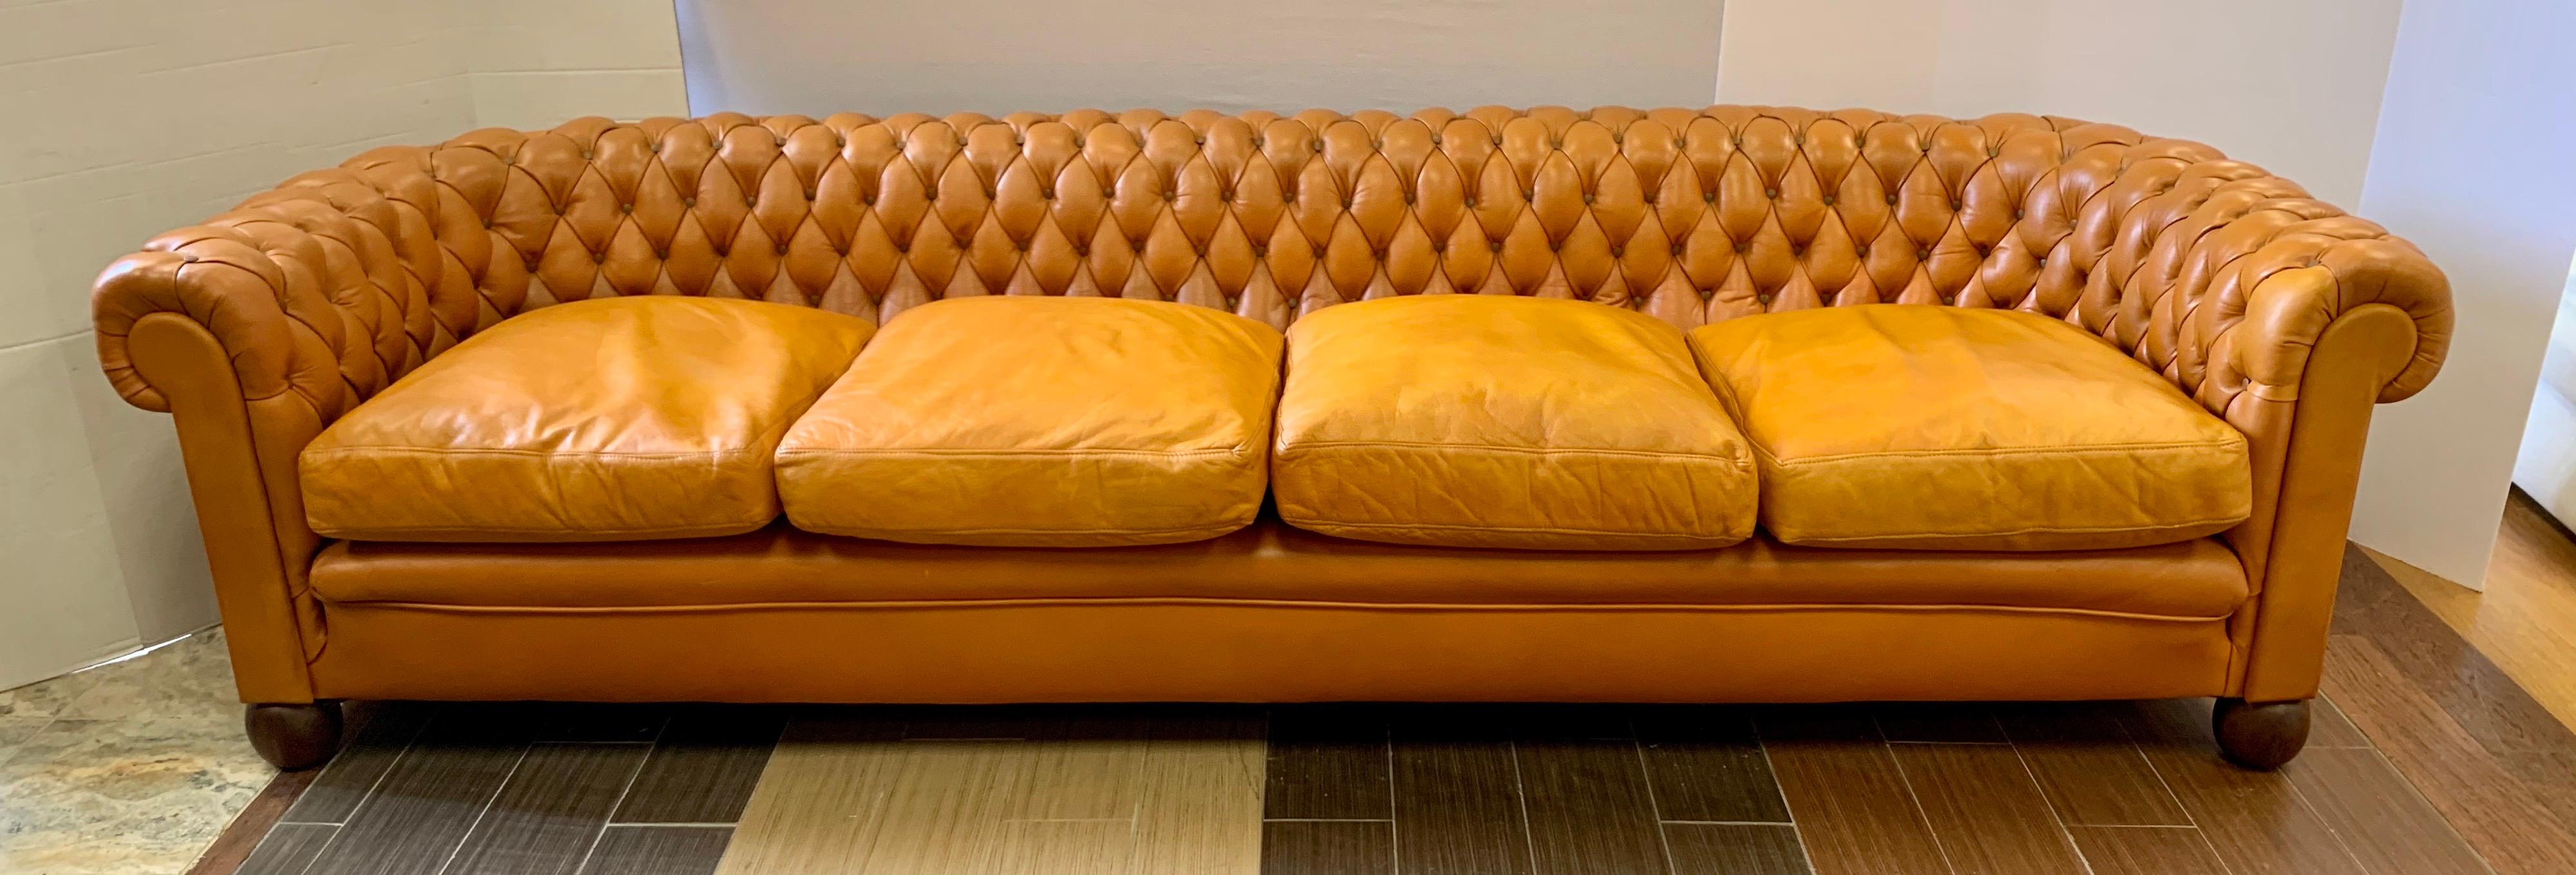 Antique extra large chesterfield sofa features distinctive, rolled arms and deep buttoned tufted detailing and is upholstered in the softest top-grain, butterscotch colored leather accented with brown button tufting. Feels as luxurious as it looks.